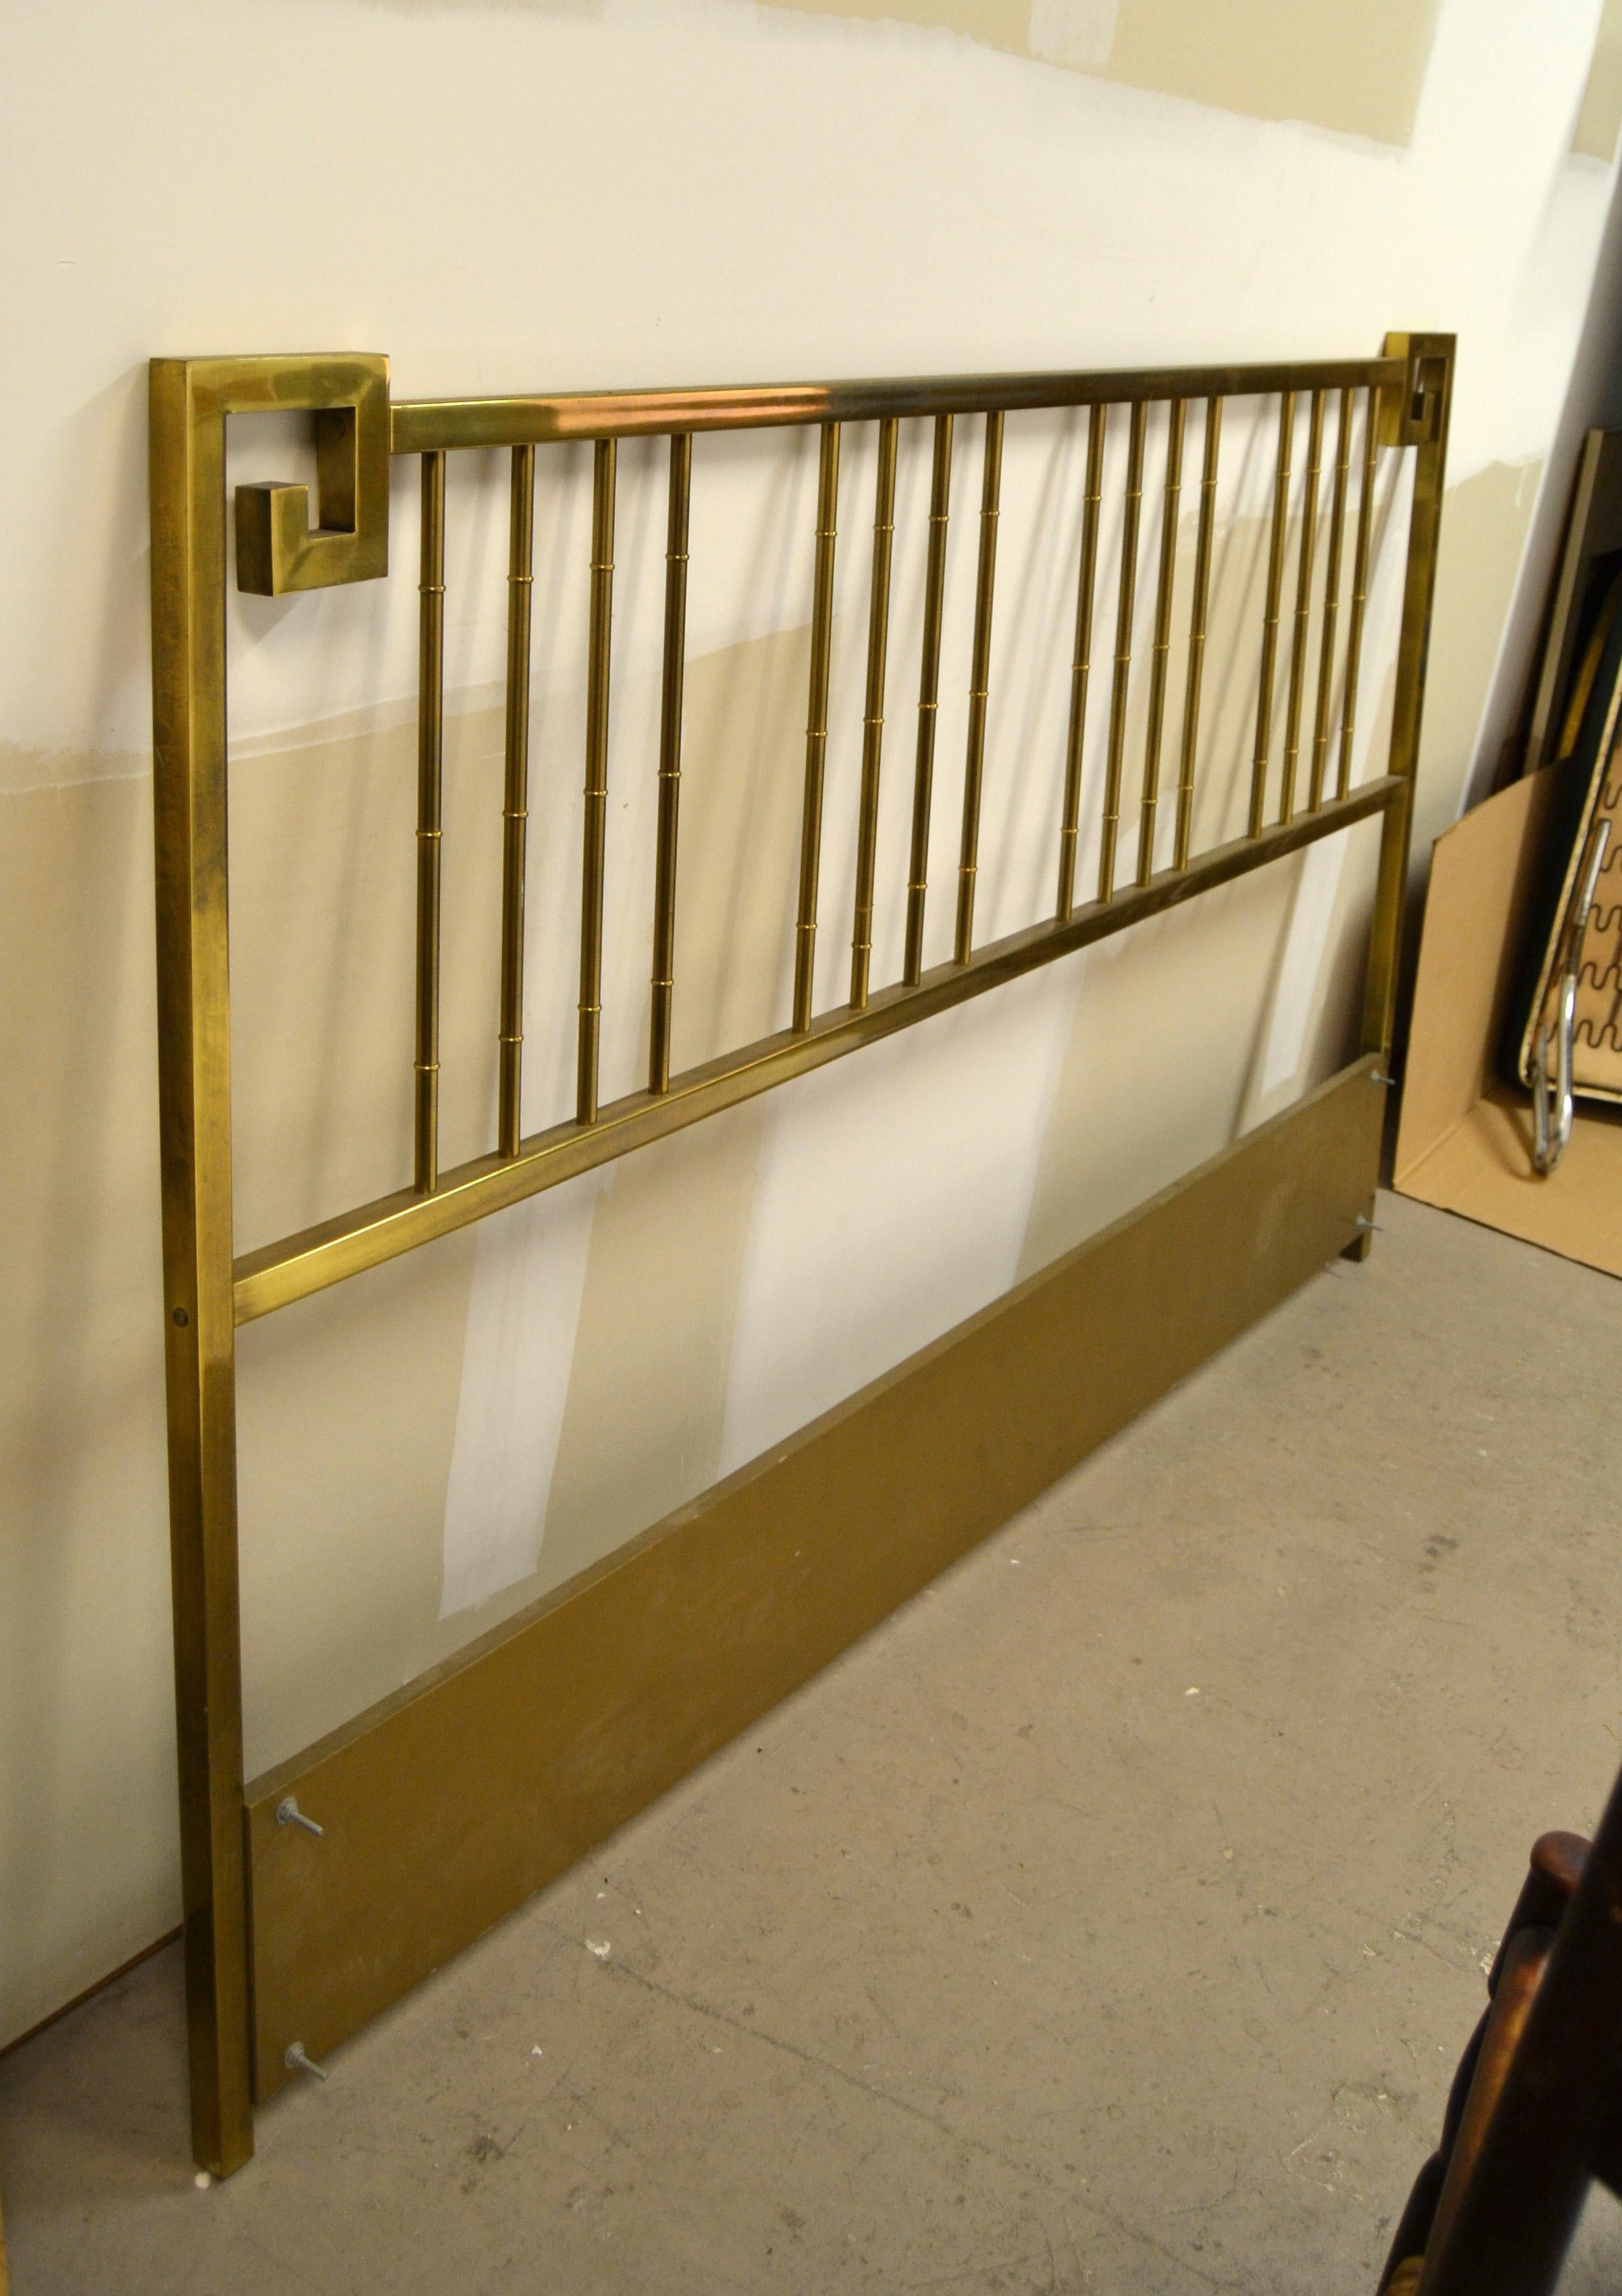 Wonderful faux bamboo brass and brass patina king size headboard executed with Greek key details.
Perfect with Mid-Century Modern decor.
Length from screw to screw is 77.25 inches.